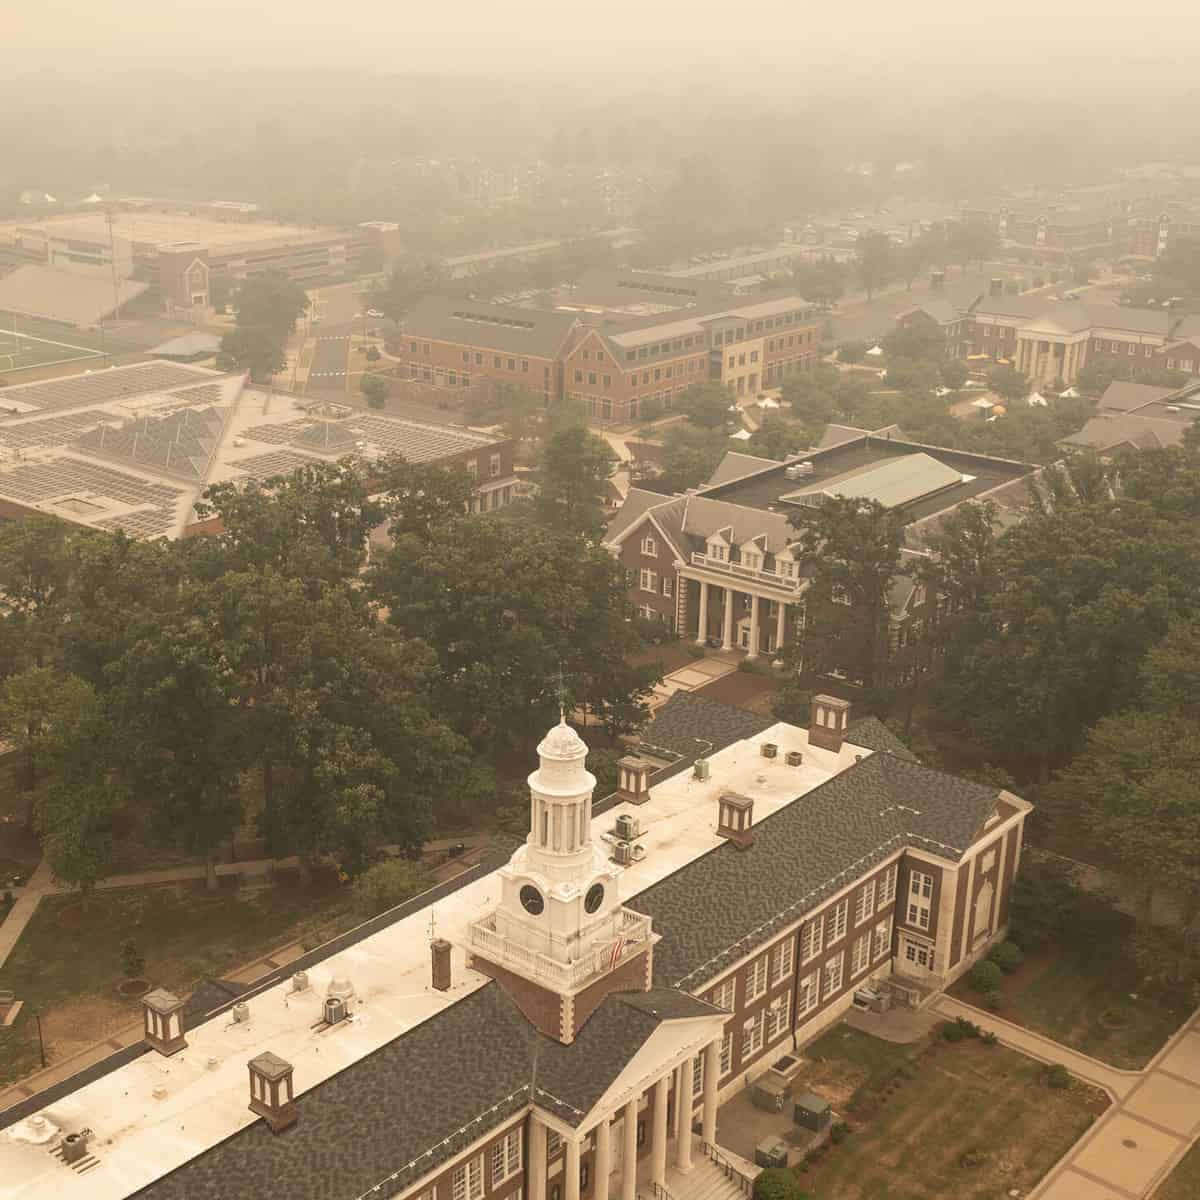 Activities in the Princeton region move indoors as wildfire smoke prompts air quality alerts